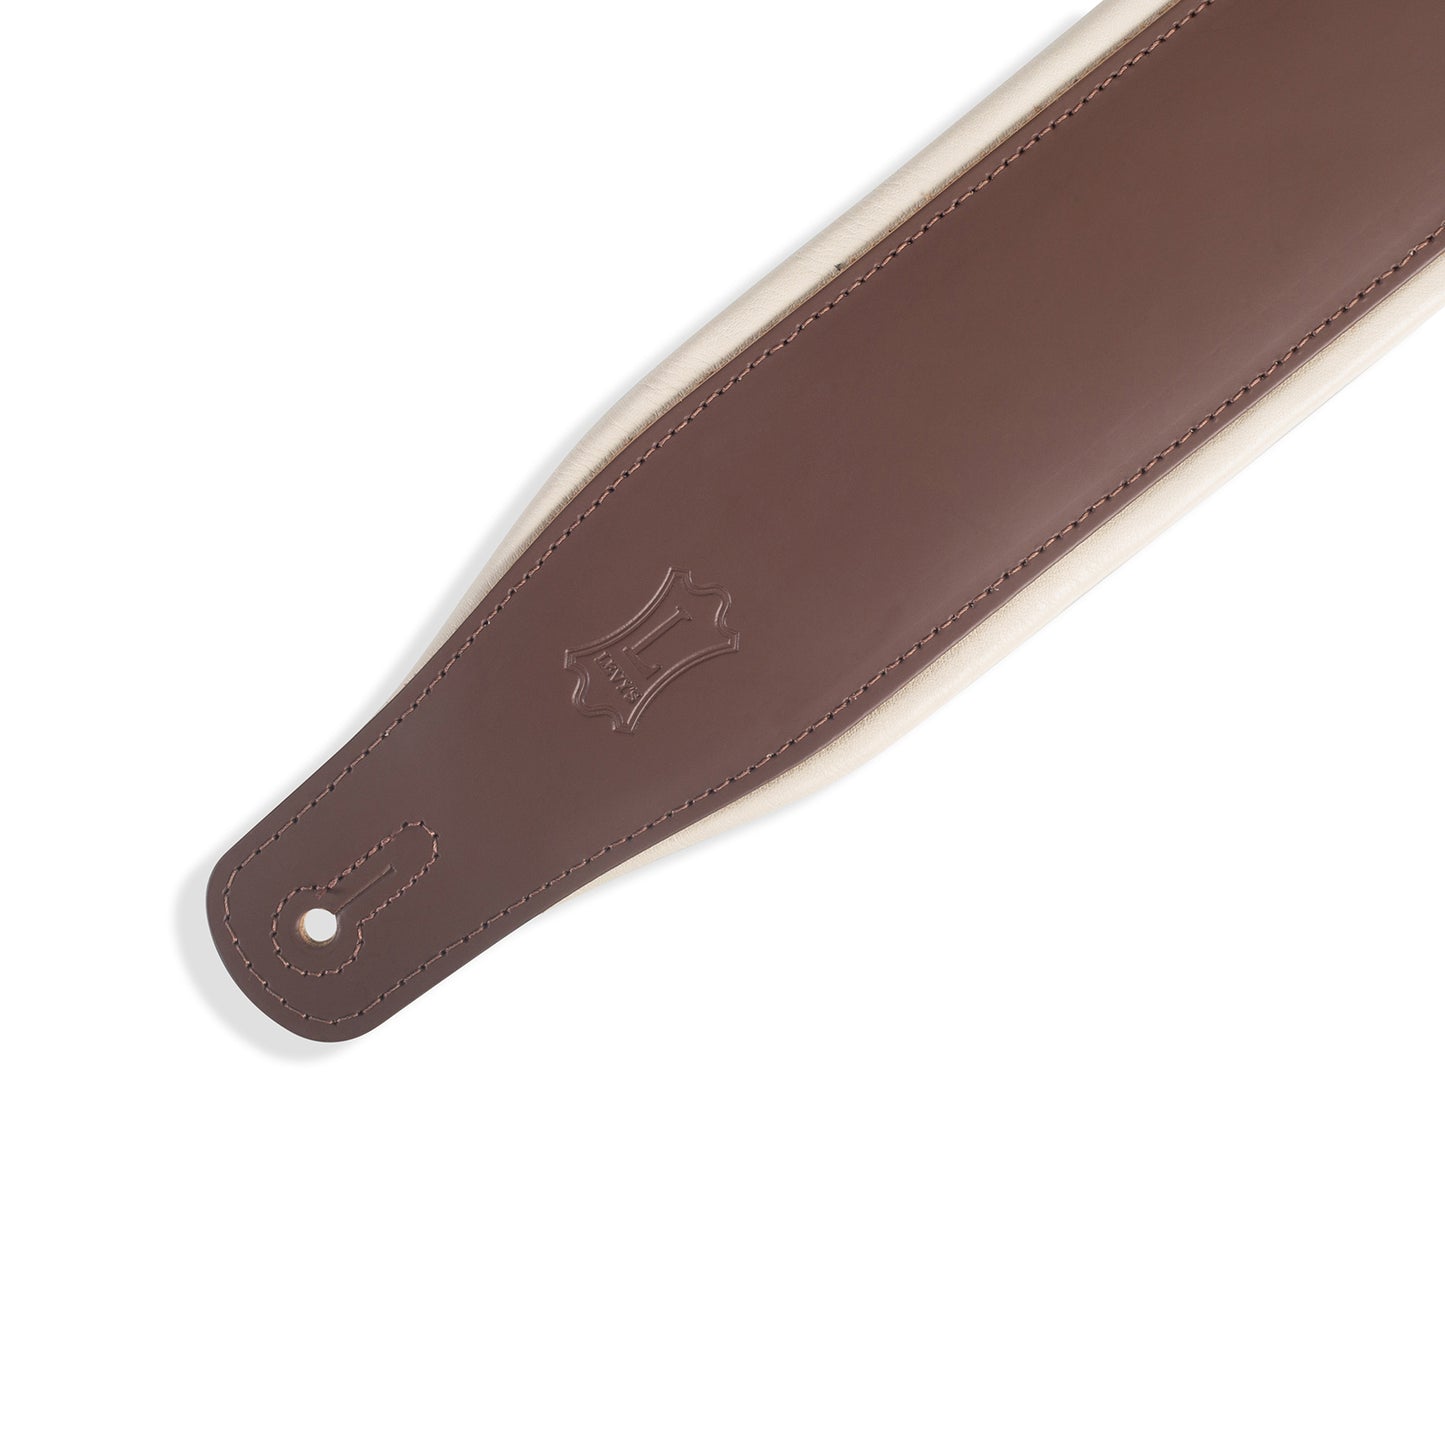 Levy's Leathers - M26PD-BRN_CRM - 3 inch Wide Top Grain Leather Guitar Strap